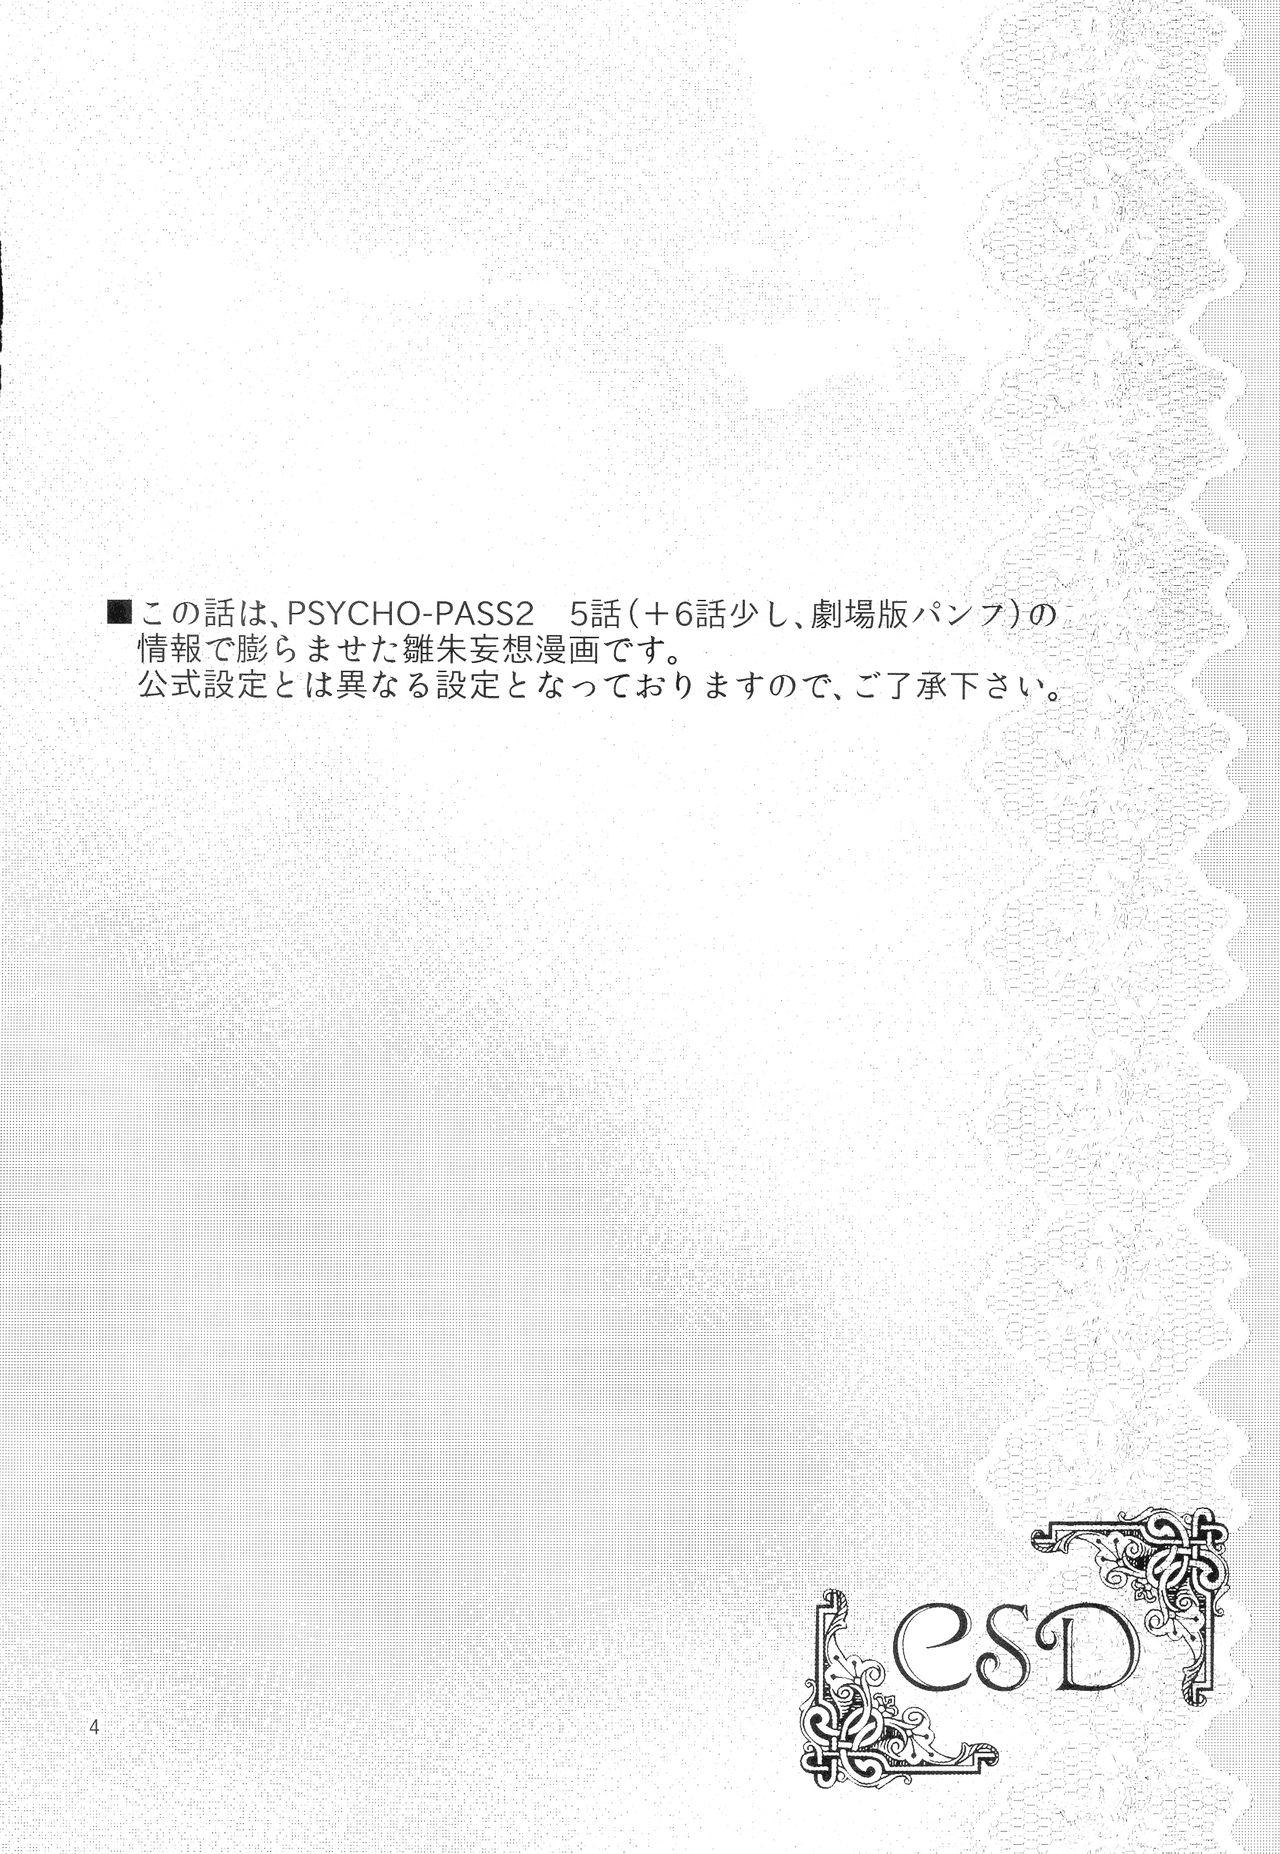 Concha CSD - Psycho-pass Stripping - Page 4